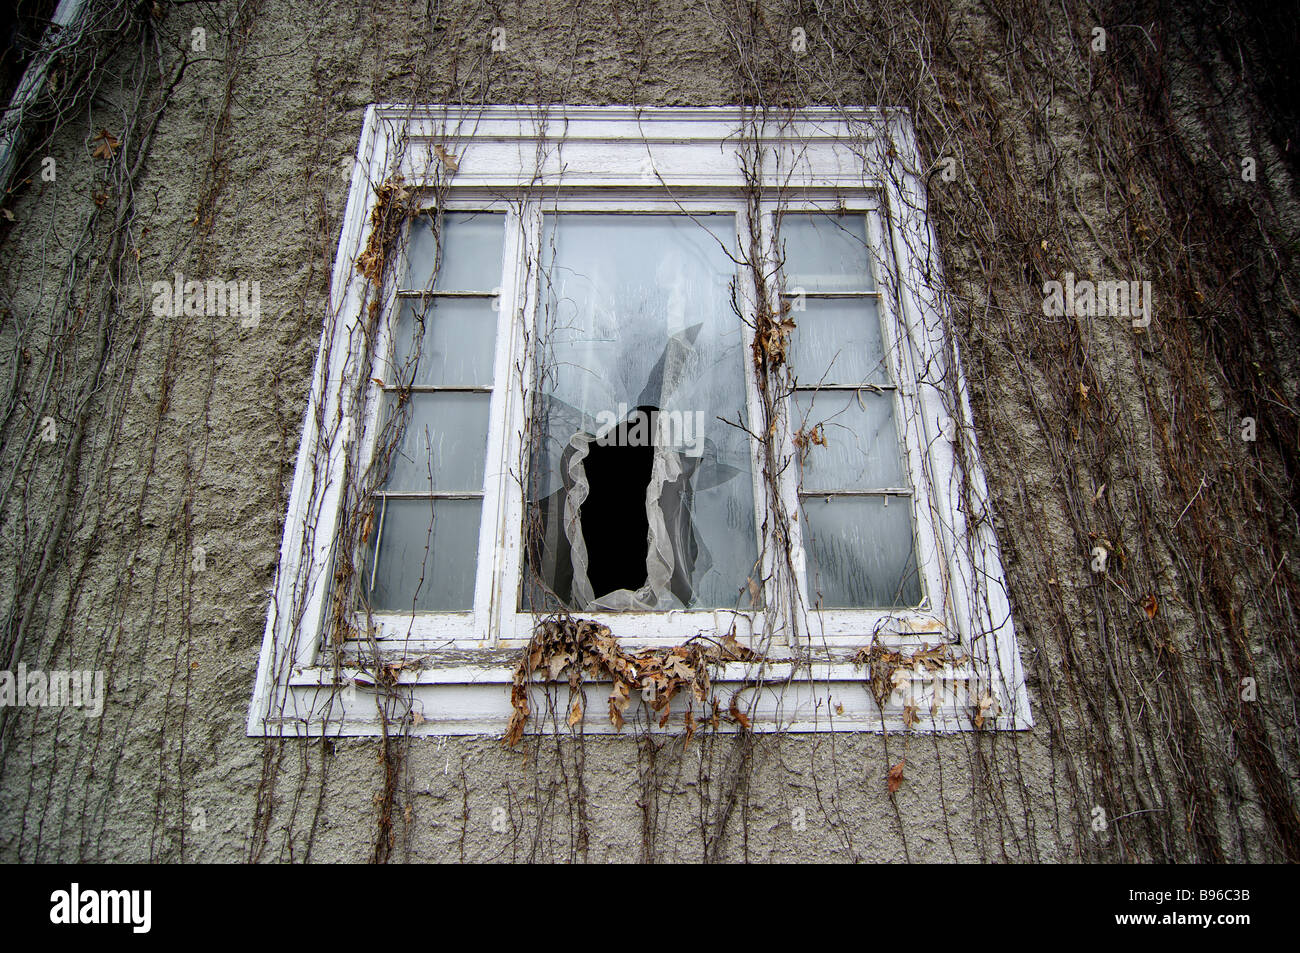 A broken window glass is framed by drapes and vines in an old foreclosed home, as the house waits for a repairman. Stock Photo